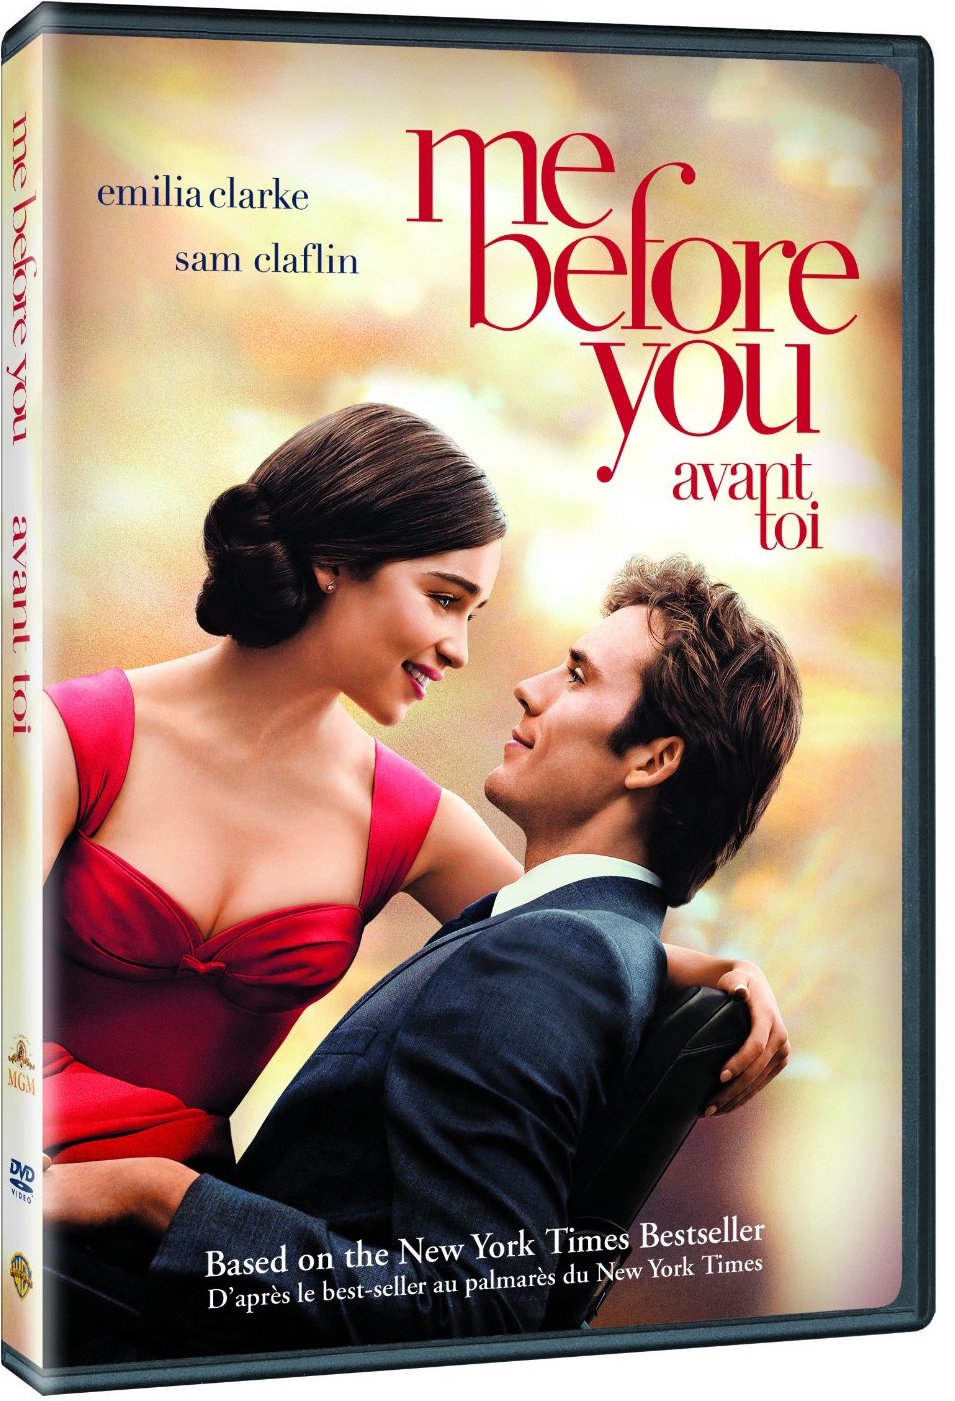 Me Before You DVD cover